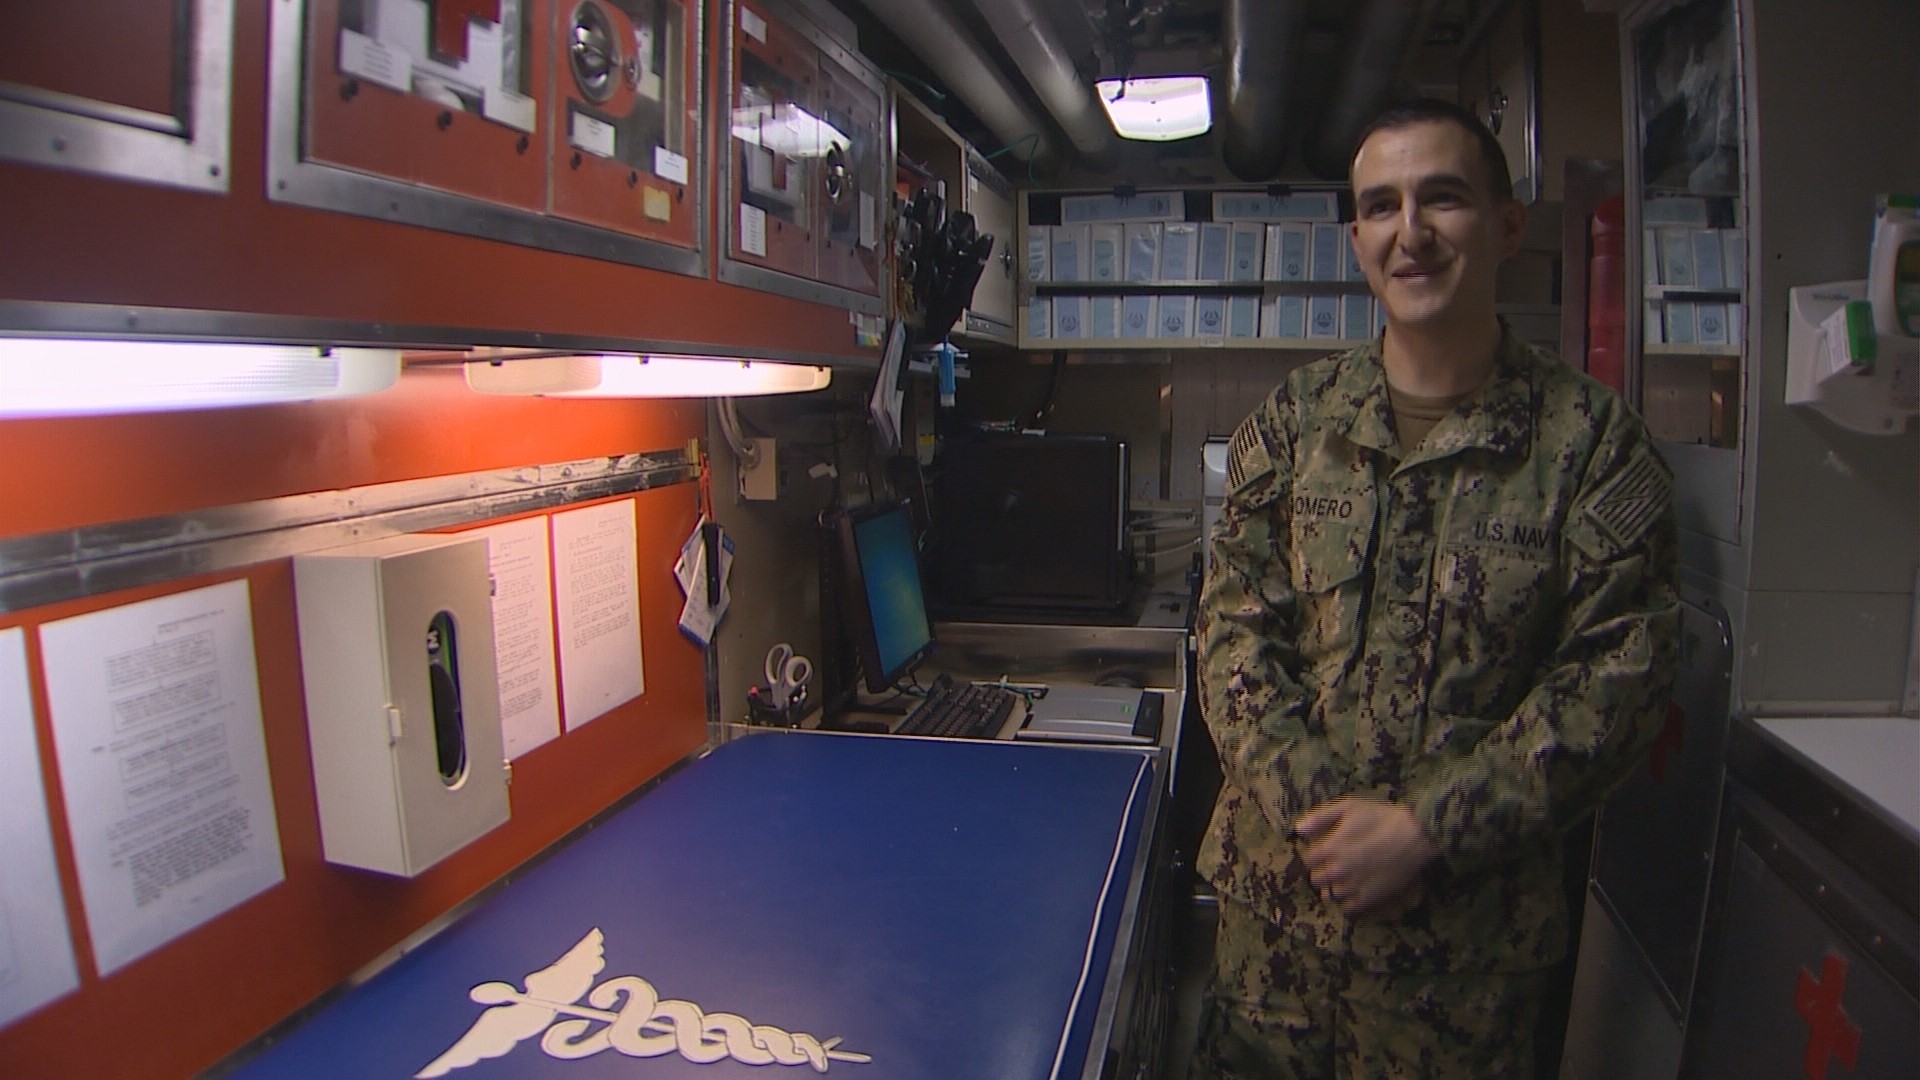 From the bunkhouse to sick bay, Navy crew members describe what it’s like to live on board an Ohio-class nuclear submarine for months at a time.